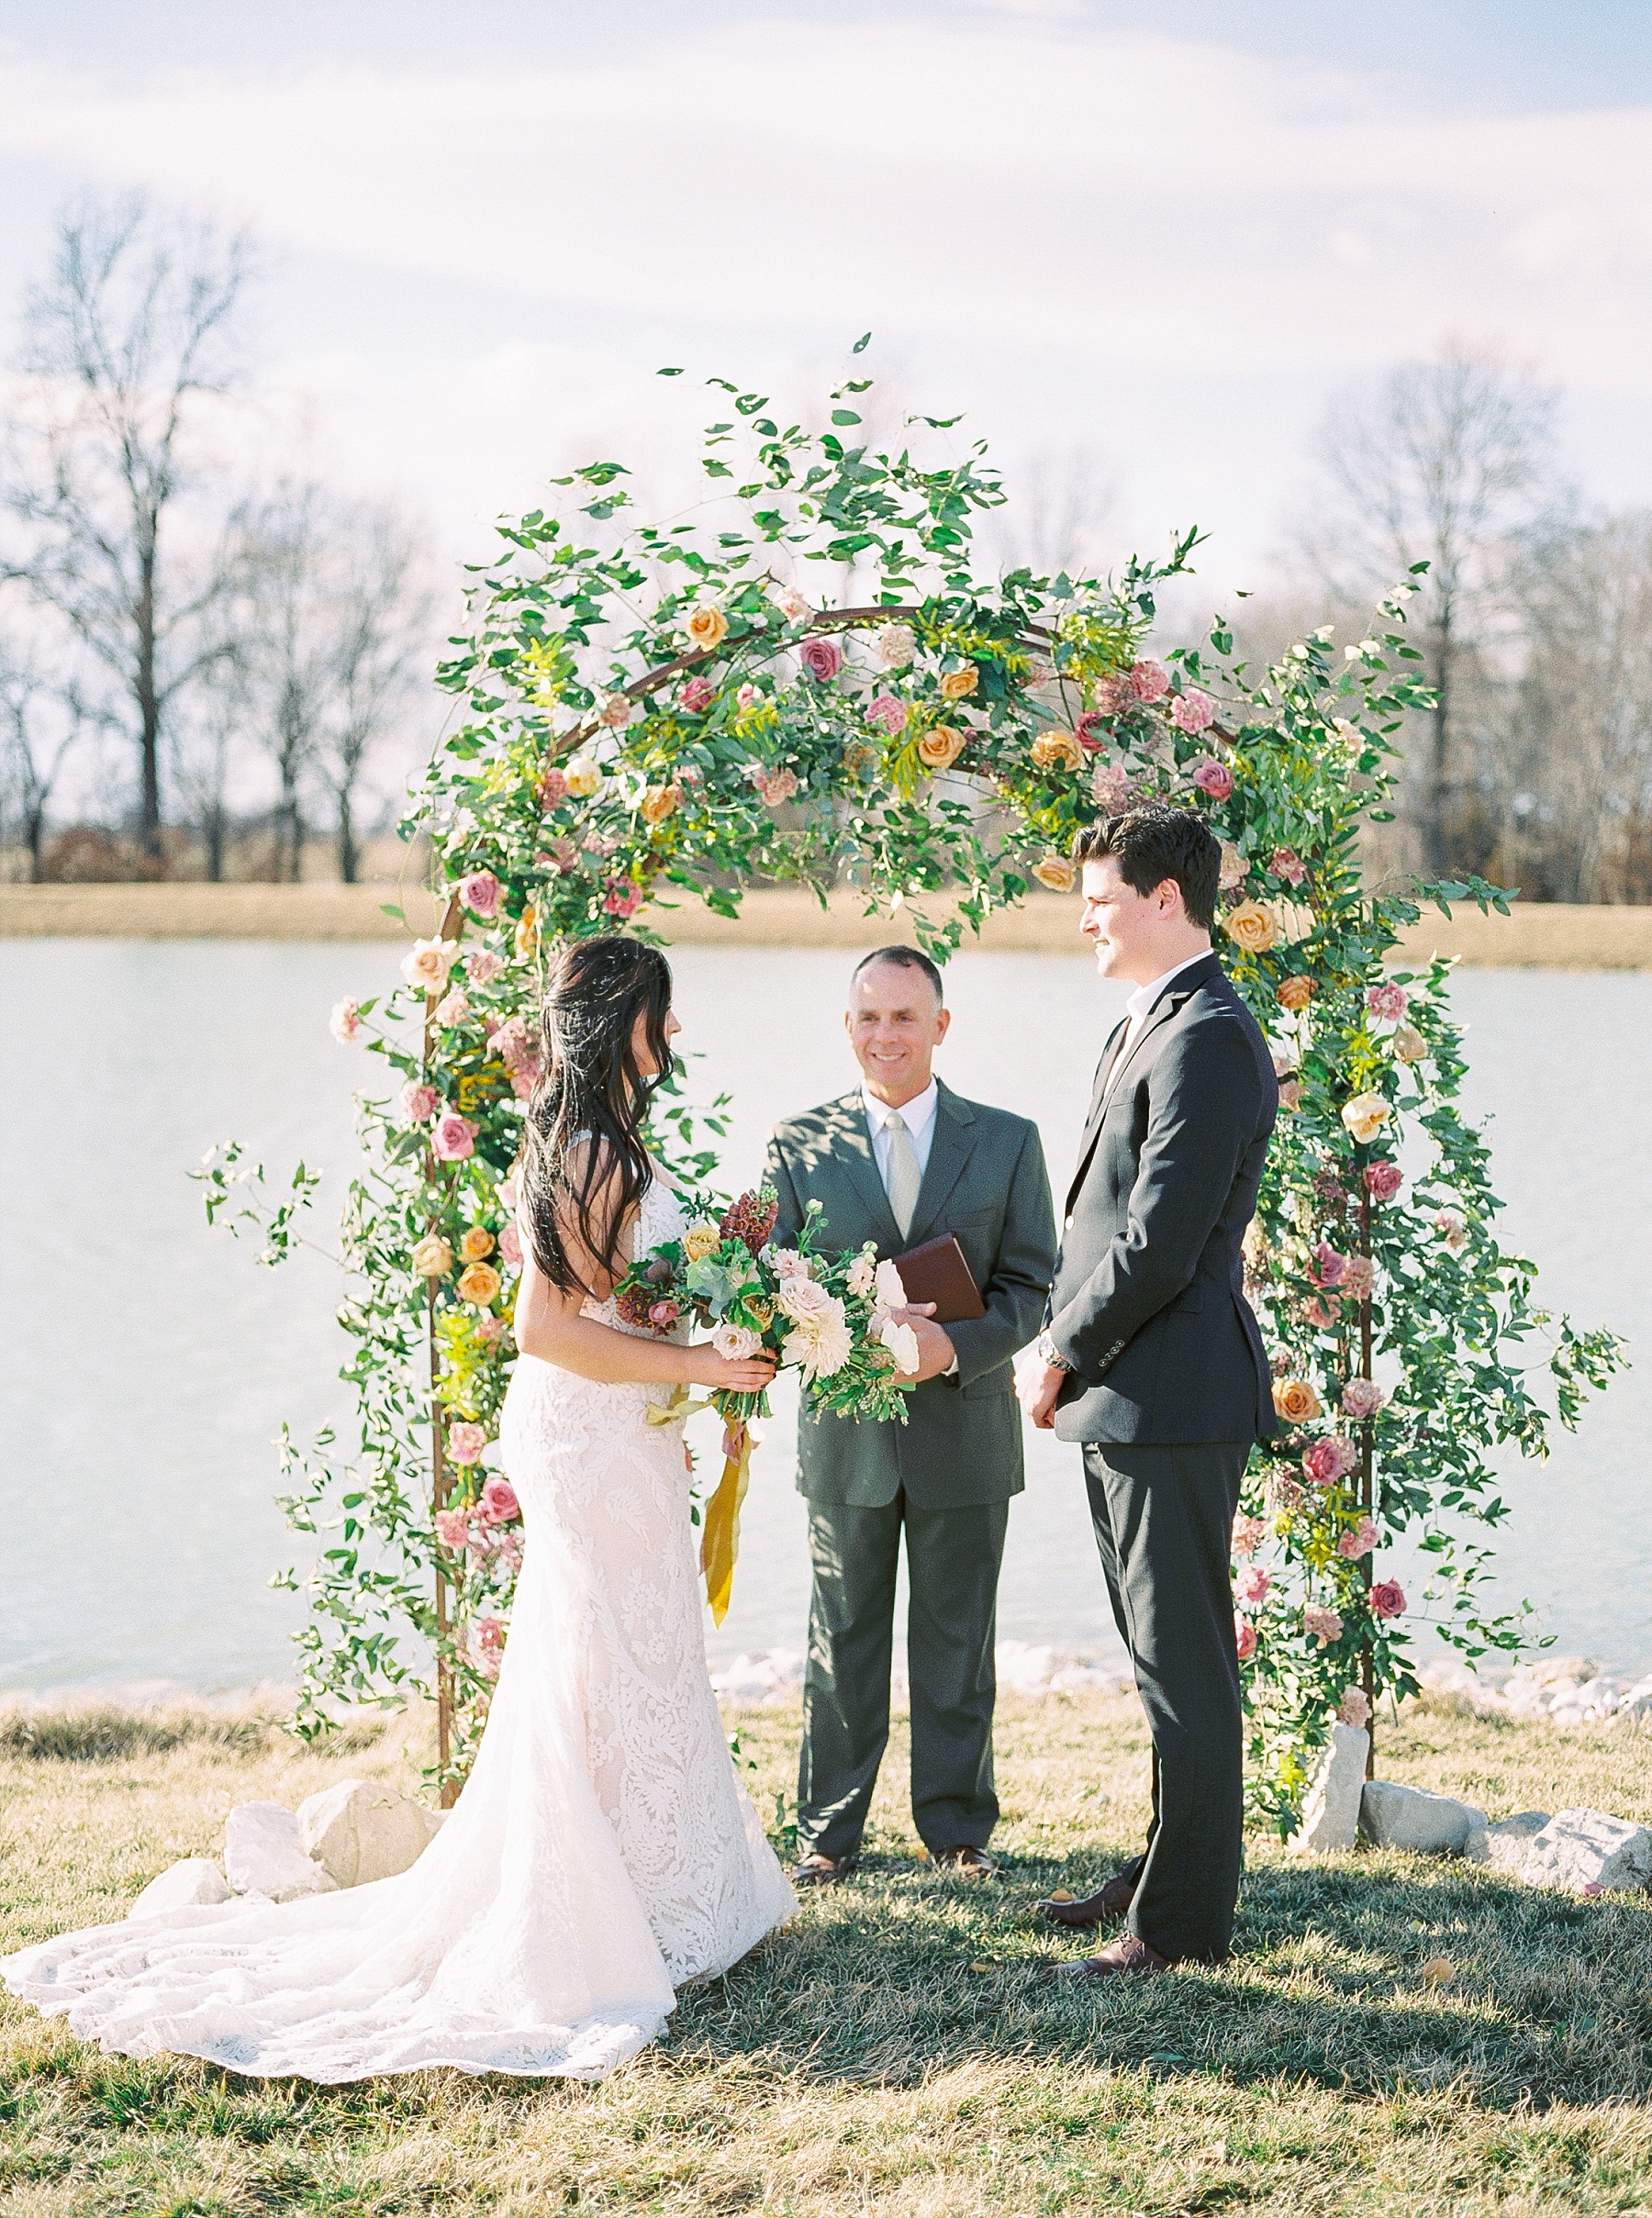 Intimate Lakeside Elopement at Emerson Fields All White Wedding Venue by Kelsi Kliethermes Photography Best Missouri and Maui Wedding Photographer_0028.jpg